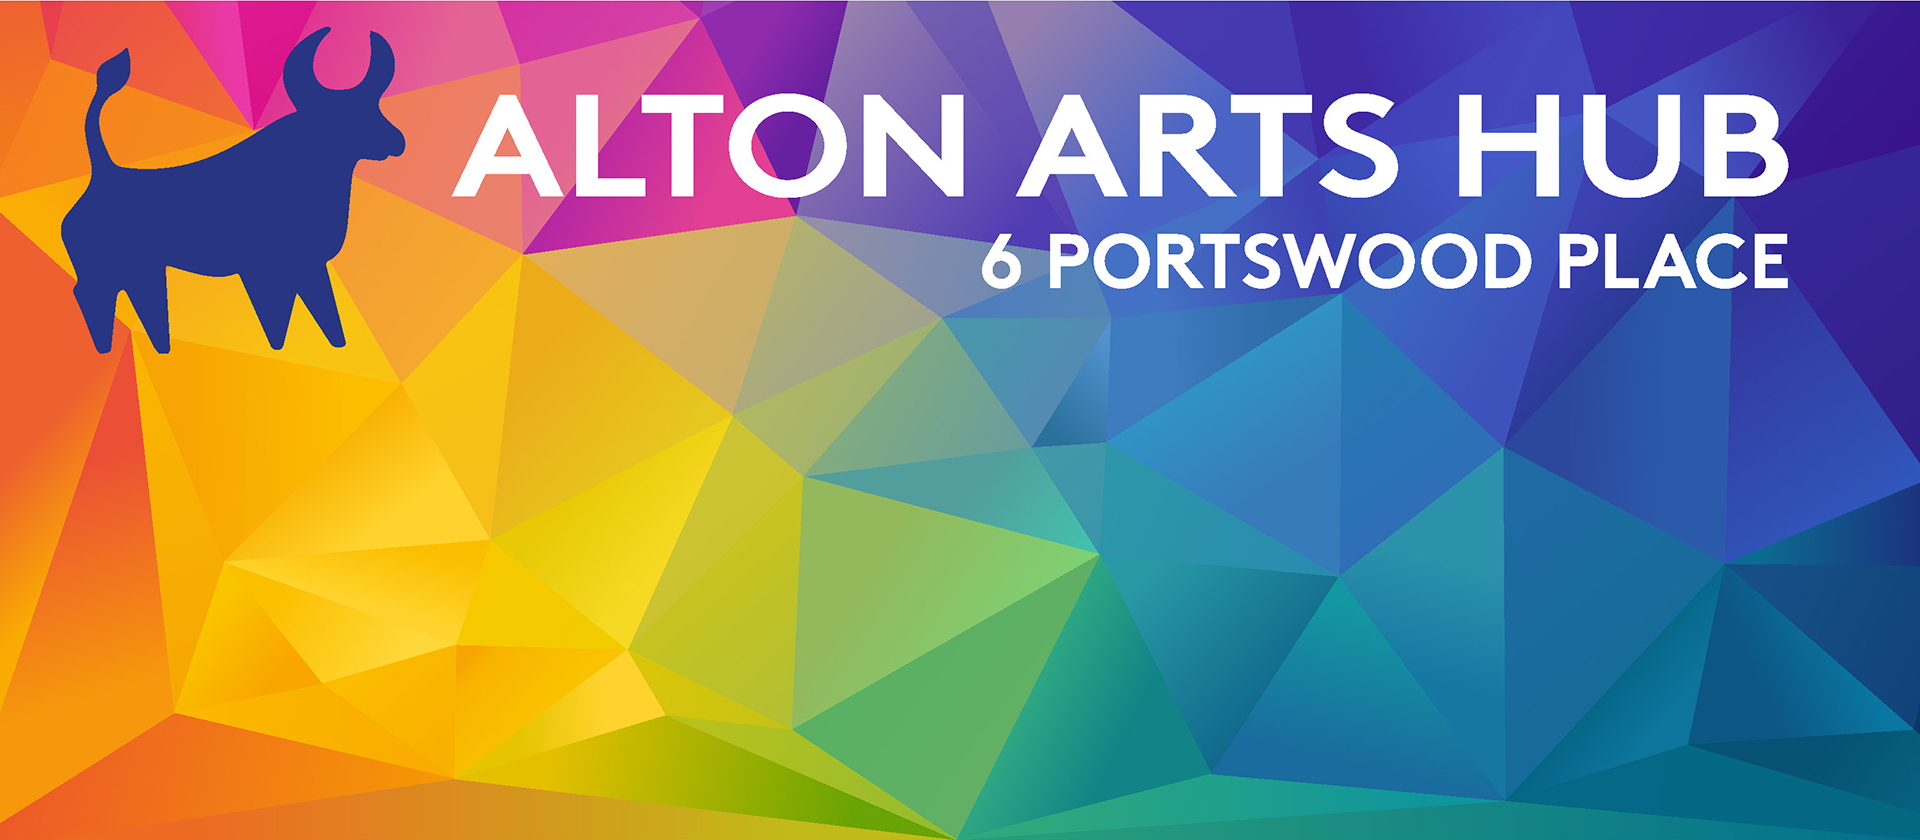 An image of the colourful Alton Arts Hub signage, which appears on the front of the unit in Portswood Place